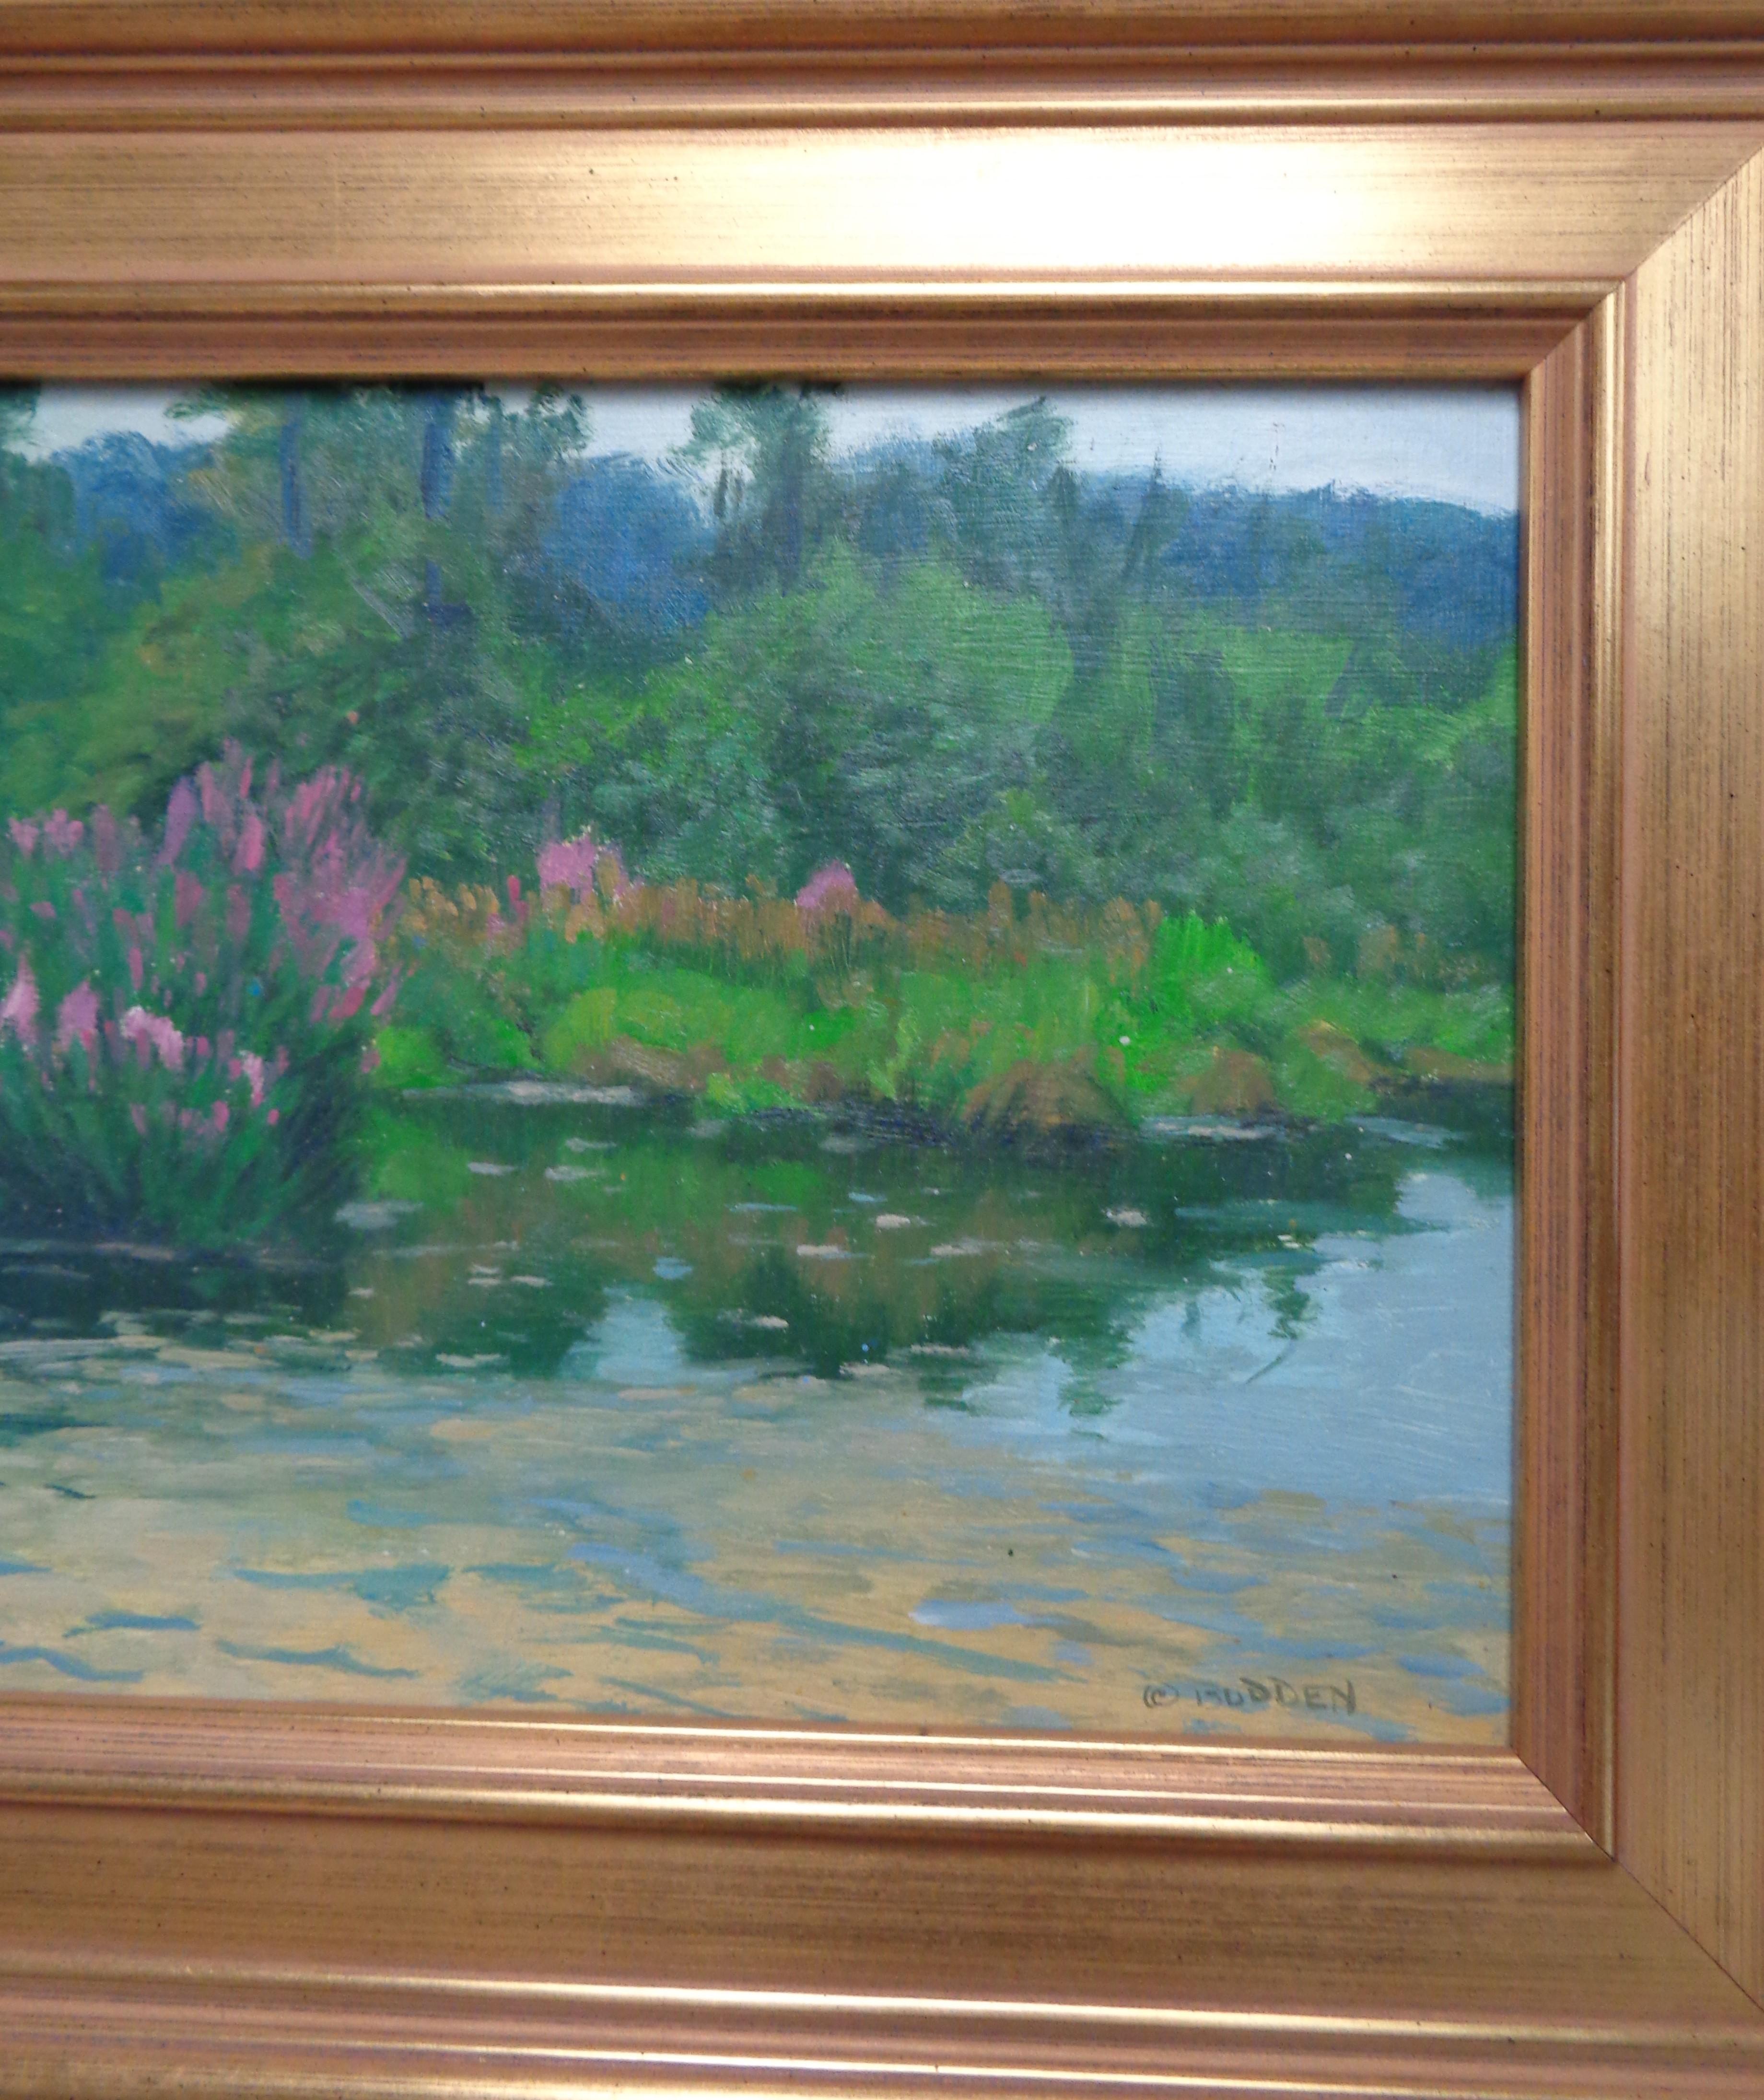  Impressionistic Floral Landscape Oil Painting Michael Budden Purple Loosestrife For Sale 3